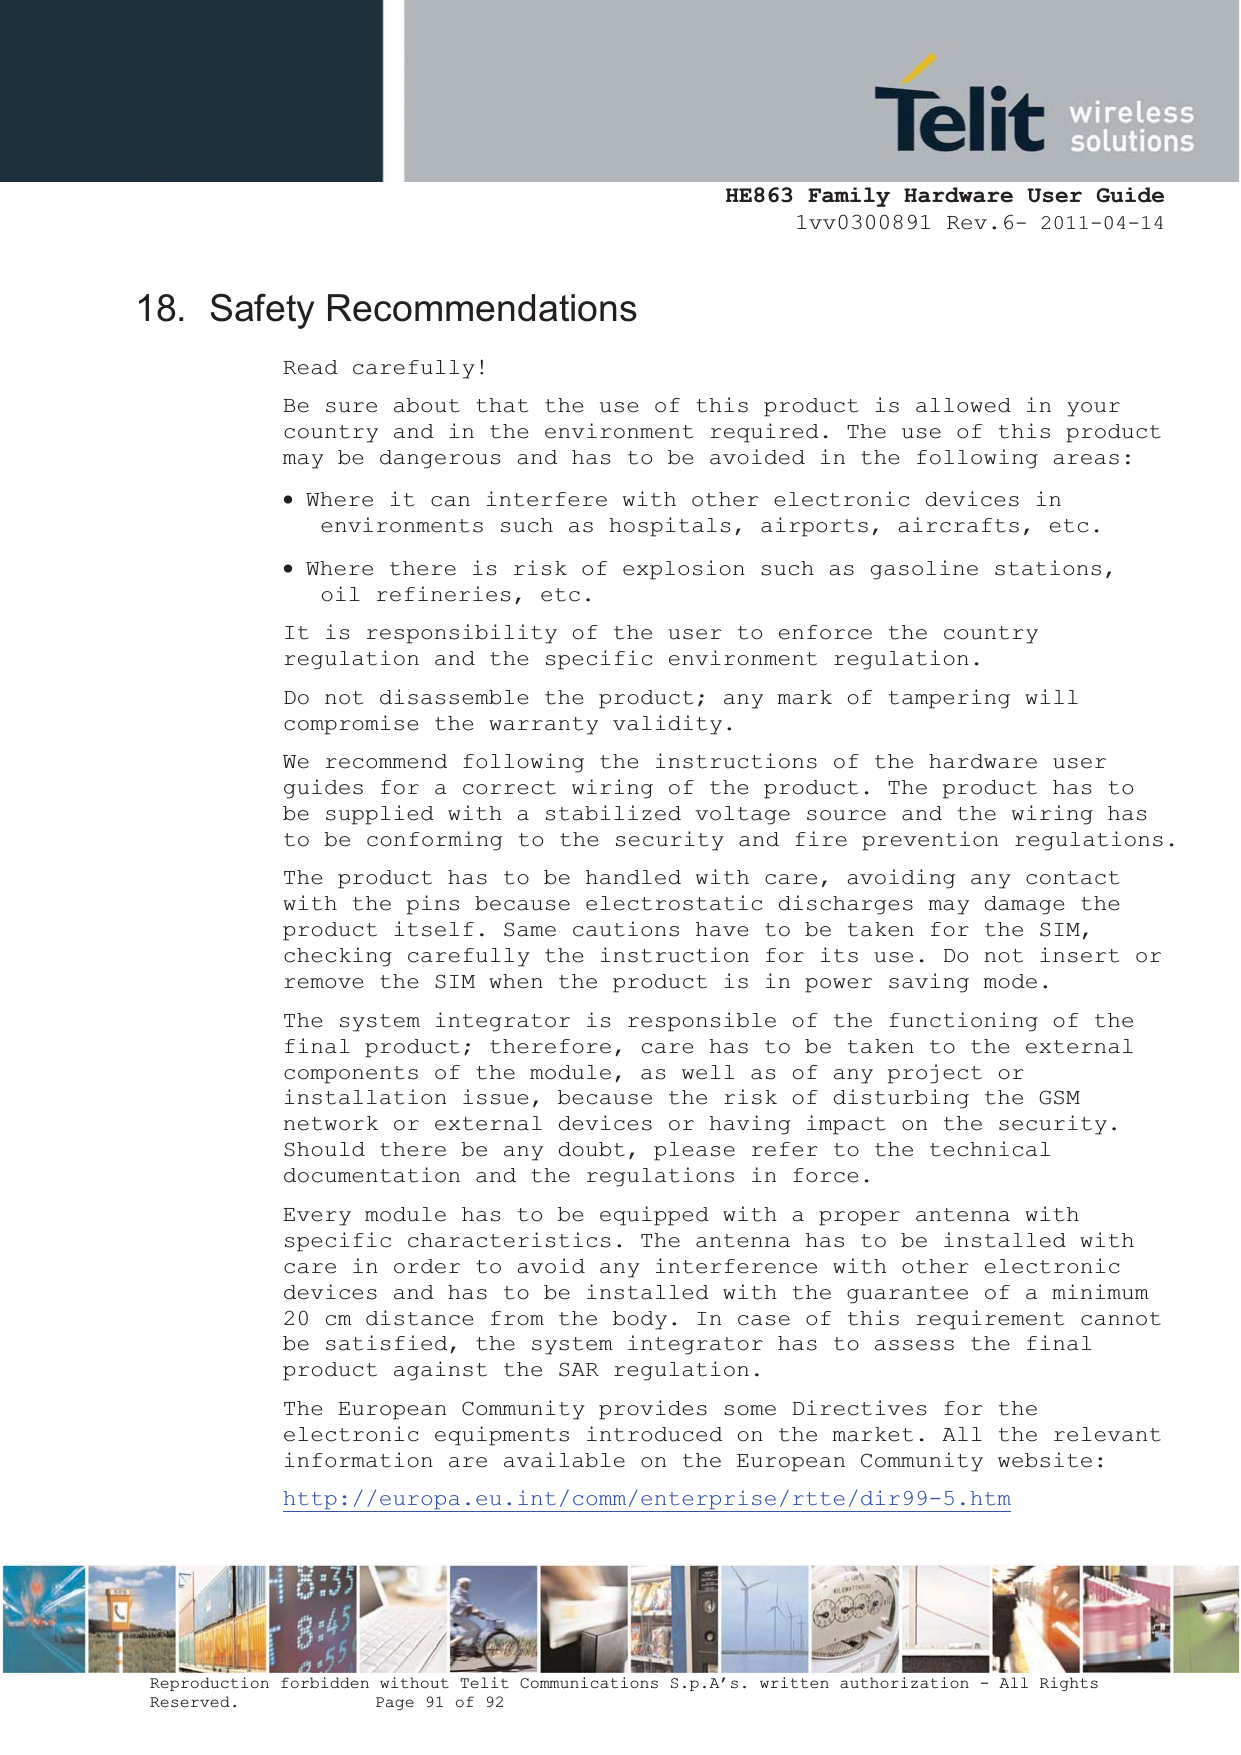  HE863 Family Hardware User Guide 1vv0300891 Rev.6- 2011-04-14    Reproduction forbidden without Telit Communications S.p.A’s. written authorization - All Rights Reserved.    Page 91 of 92  18. Safety Recommendations Read carefully! Be sure about that the use of this product is allowed in your country and in the environment required. The use of this product may be dangerous and has to be avoided in the following areas: x Where it can interfere with other electronic devices in environments such as hospitals, airports, aircrafts, etc. x Where there is risk of explosion such as gasoline stations, oil refineries, etc.  It is responsibility of the user to enforce the country regulation and the specific environment regulation. Do not disassemble the product; any mark of tampering will compromise the warranty validity. We recommend following the instructions of the hardware user guides for a correct wiring of the product. The product has to be supplied with a stabilized voltage source and the wiring has to be conforming to the security and fire prevention regulations. The product has to be handled with care, avoiding any contact with the pins because electrostatic discharges may damage the product itself. Same cautions have to be taken for the SIM, checking carefully the instruction for its use. Do not insert or remove the SIM when the product is in power saving mode. The system integrator is responsible of the functioning of the final product; therefore, care has to be taken to the external components of the module, as well as of any project or installation issue, because the risk of disturbing the GSM network or external devices or having impact on the security. Should there be any doubt, please refer to the technical documentation and the regulations in force. Every module has to be equipped with a proper antenna with specific characteristics. The antenna has to be installed with care in order to avoid any interference with other electronic devices and has to be installed with the guarantee of a minimum 20 cm distance from the body. In case of this requirement cannot be satisfied, the system integrator has to assess the final product against the SAR regulation. The European Community provides some Directives for the electronic equipments introduced on the market. All the relevant information are available on the European Community website: http://europa.eu.int/comm/enterprise/rtte/dir99-5.htm 